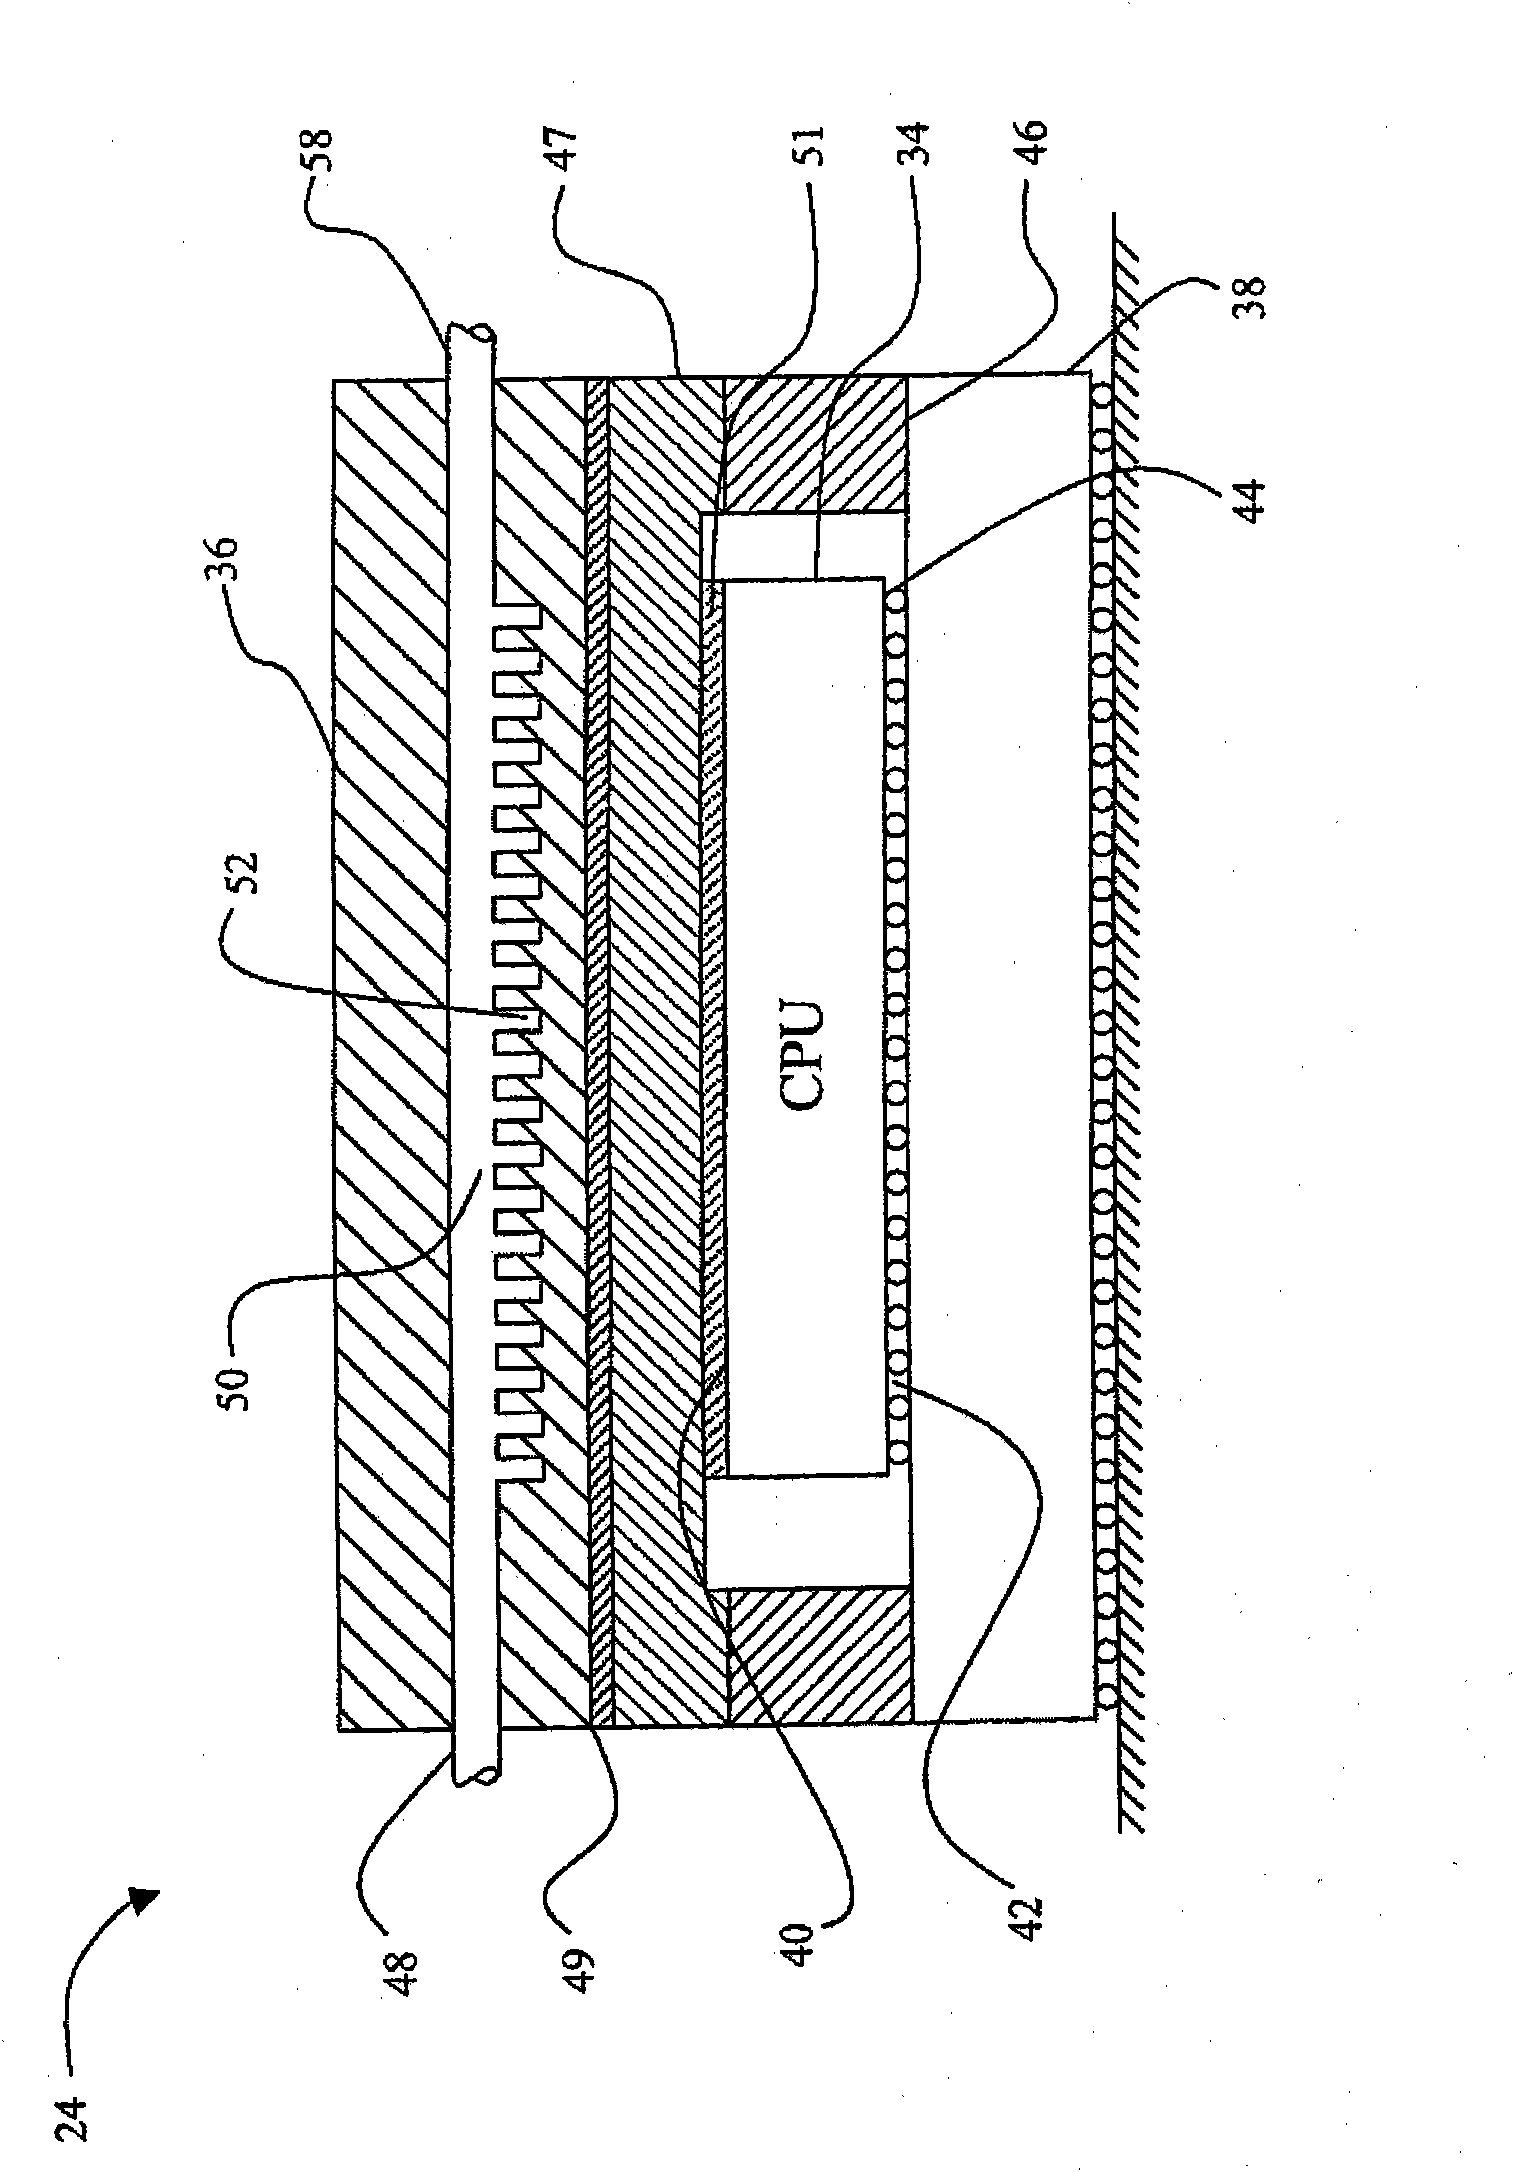 Variable flow computer cooling system for a data center and method of operation